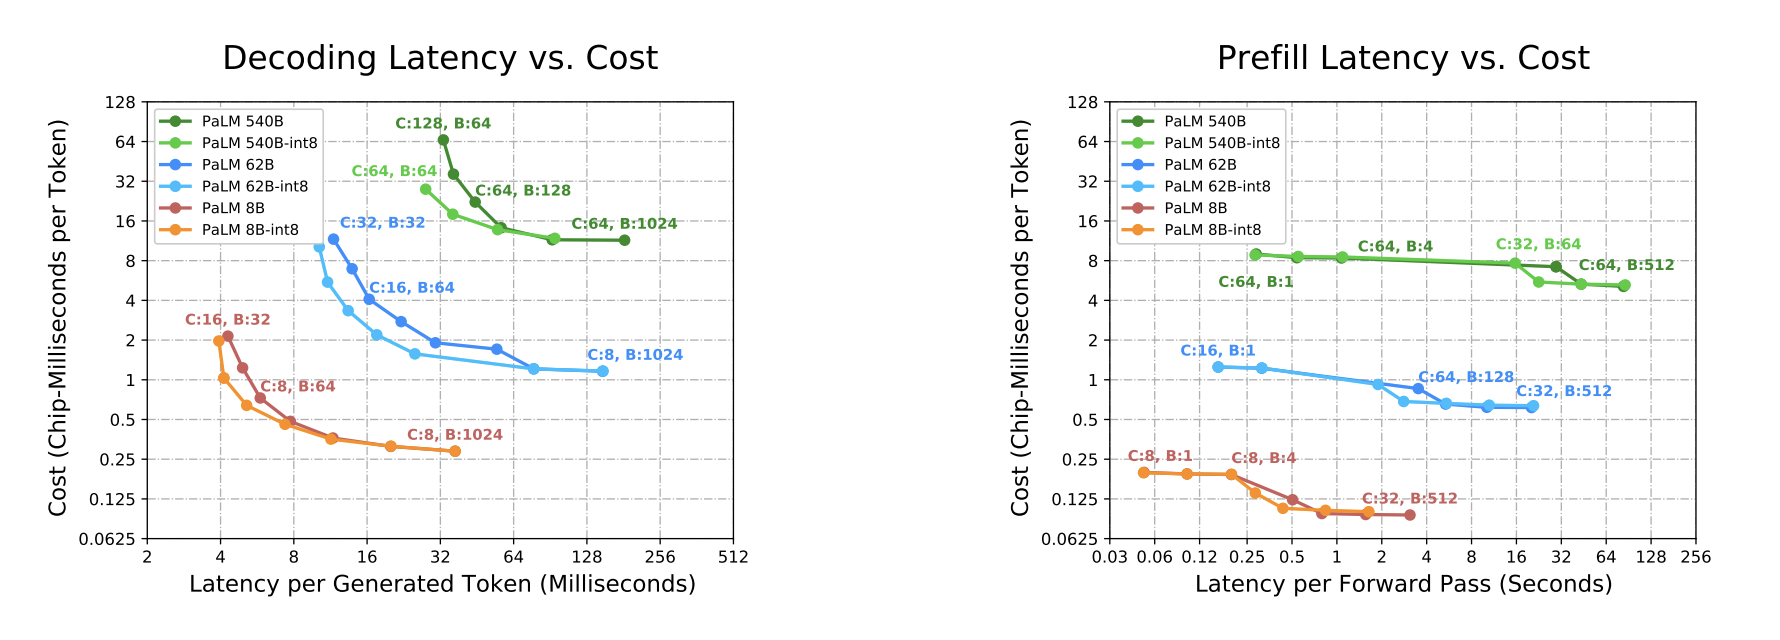 Prefill and Decoding cost vs latency curves